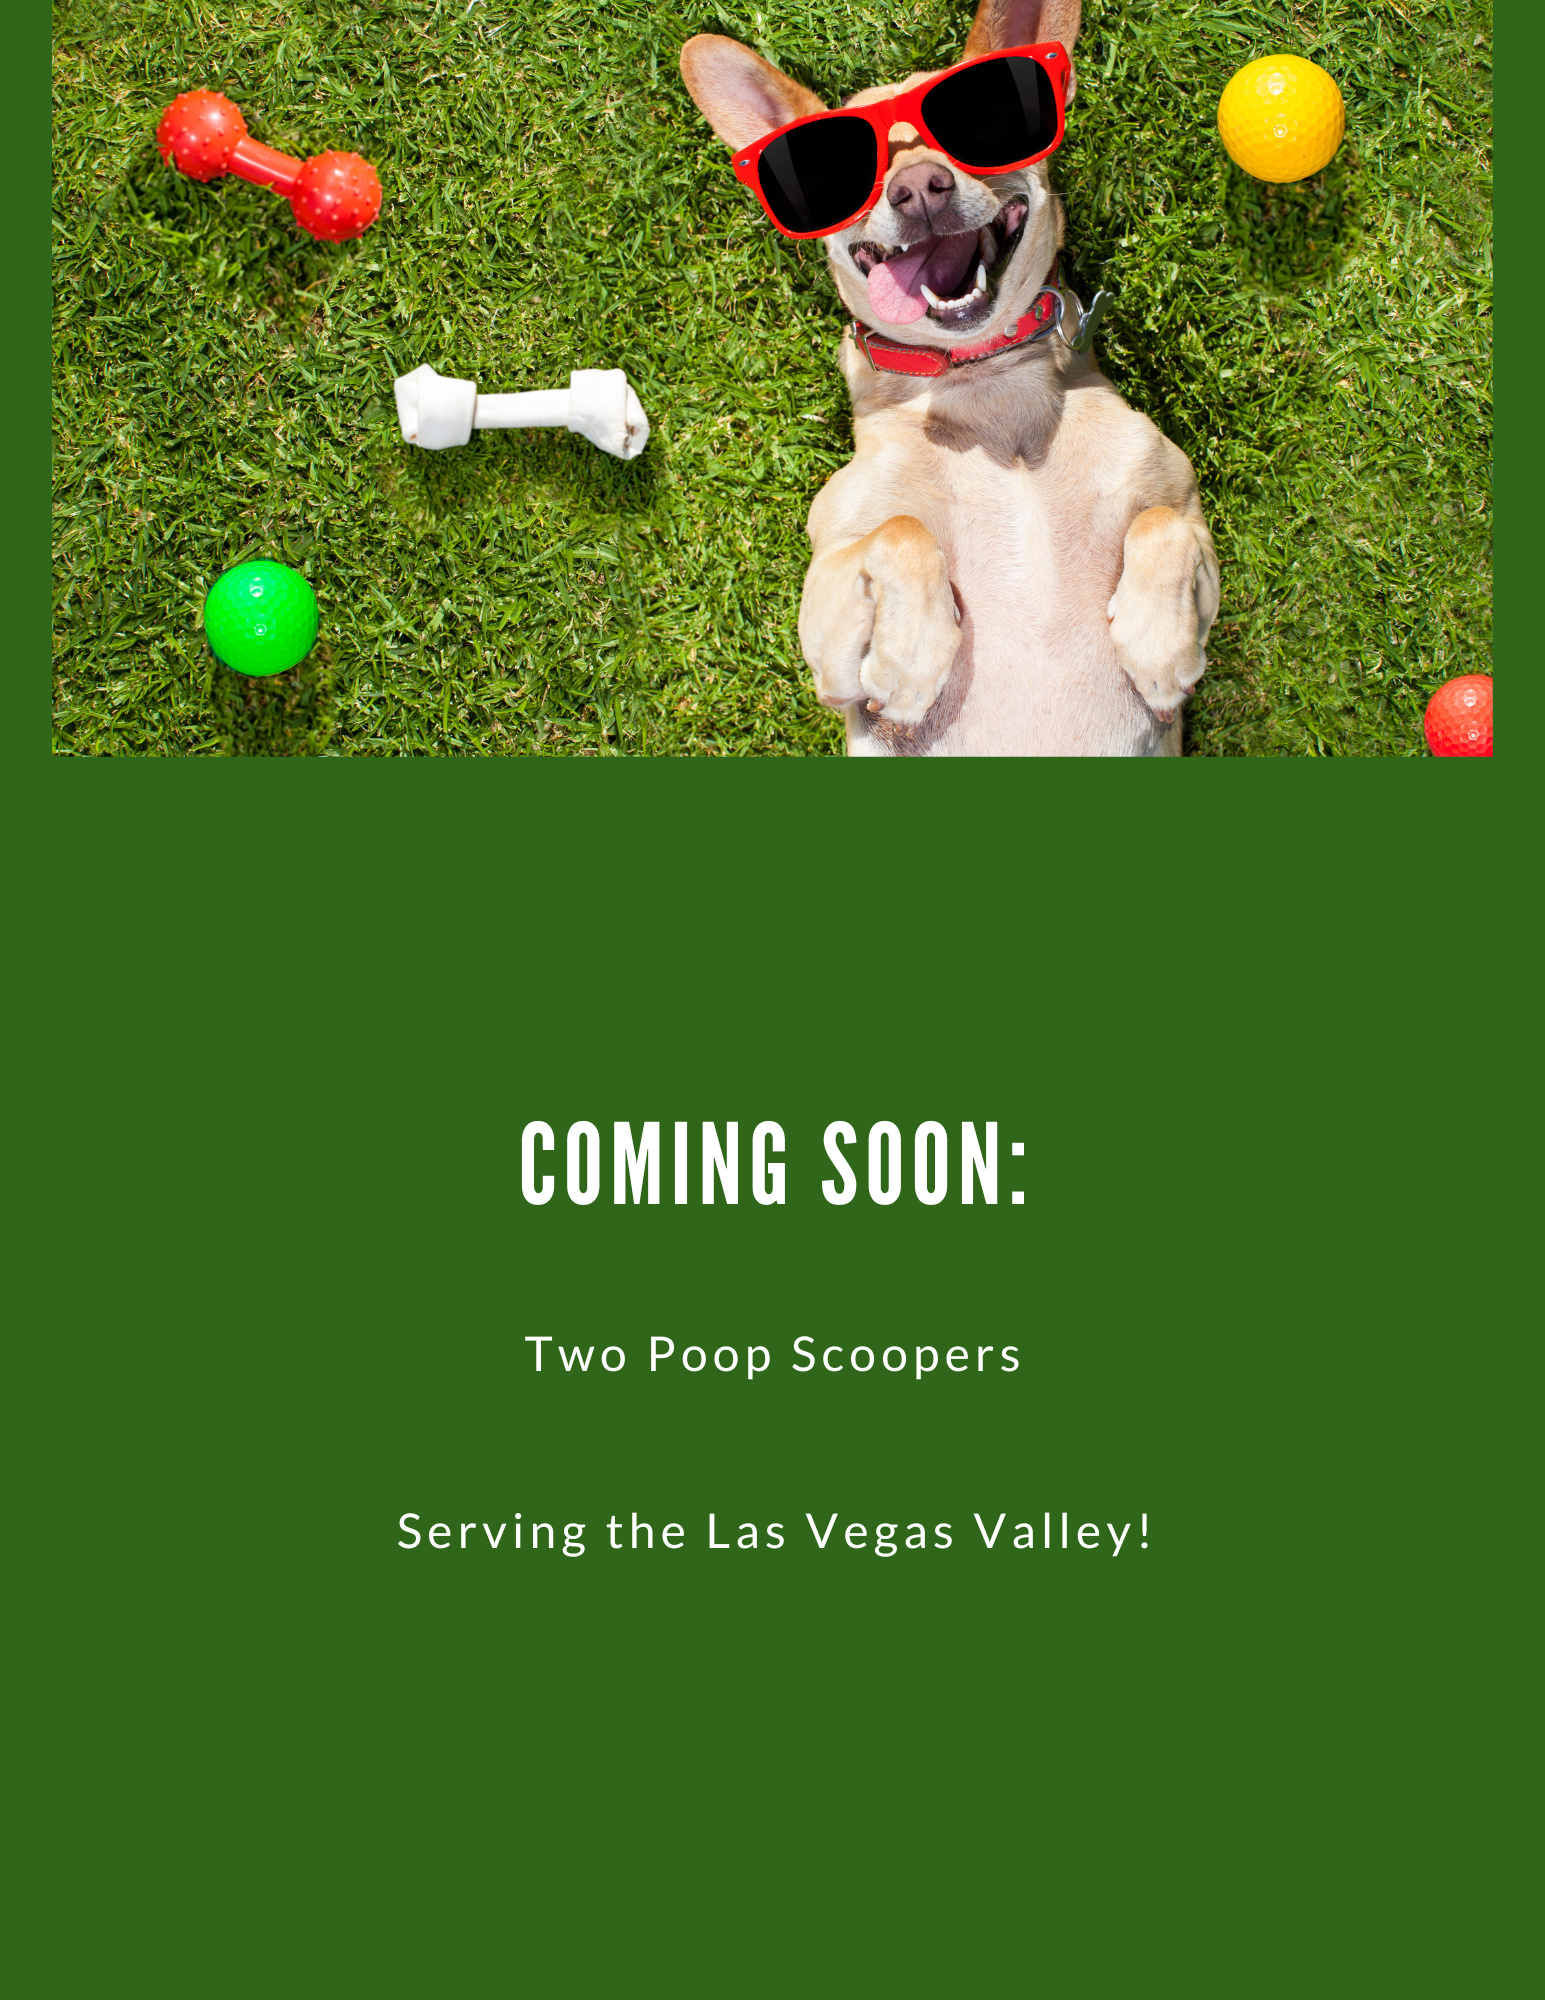 Two poop scoopers are coming soon to the Las Vegas Valley serving you and your pets.